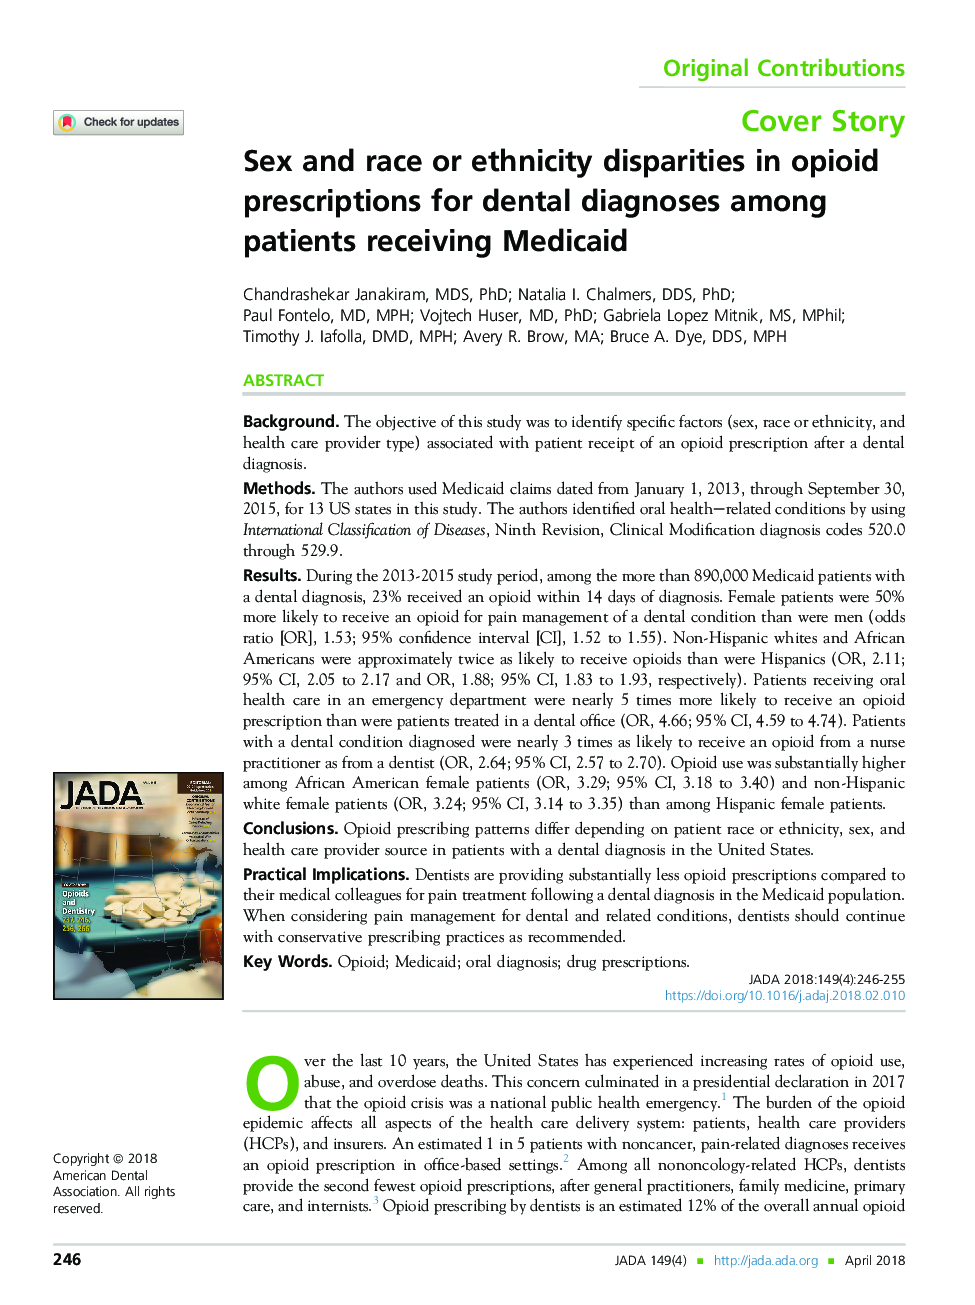 Sex and race or ethnicity disparities in opioid prescriptions for dental diagnoses among patients receiving Medicaid